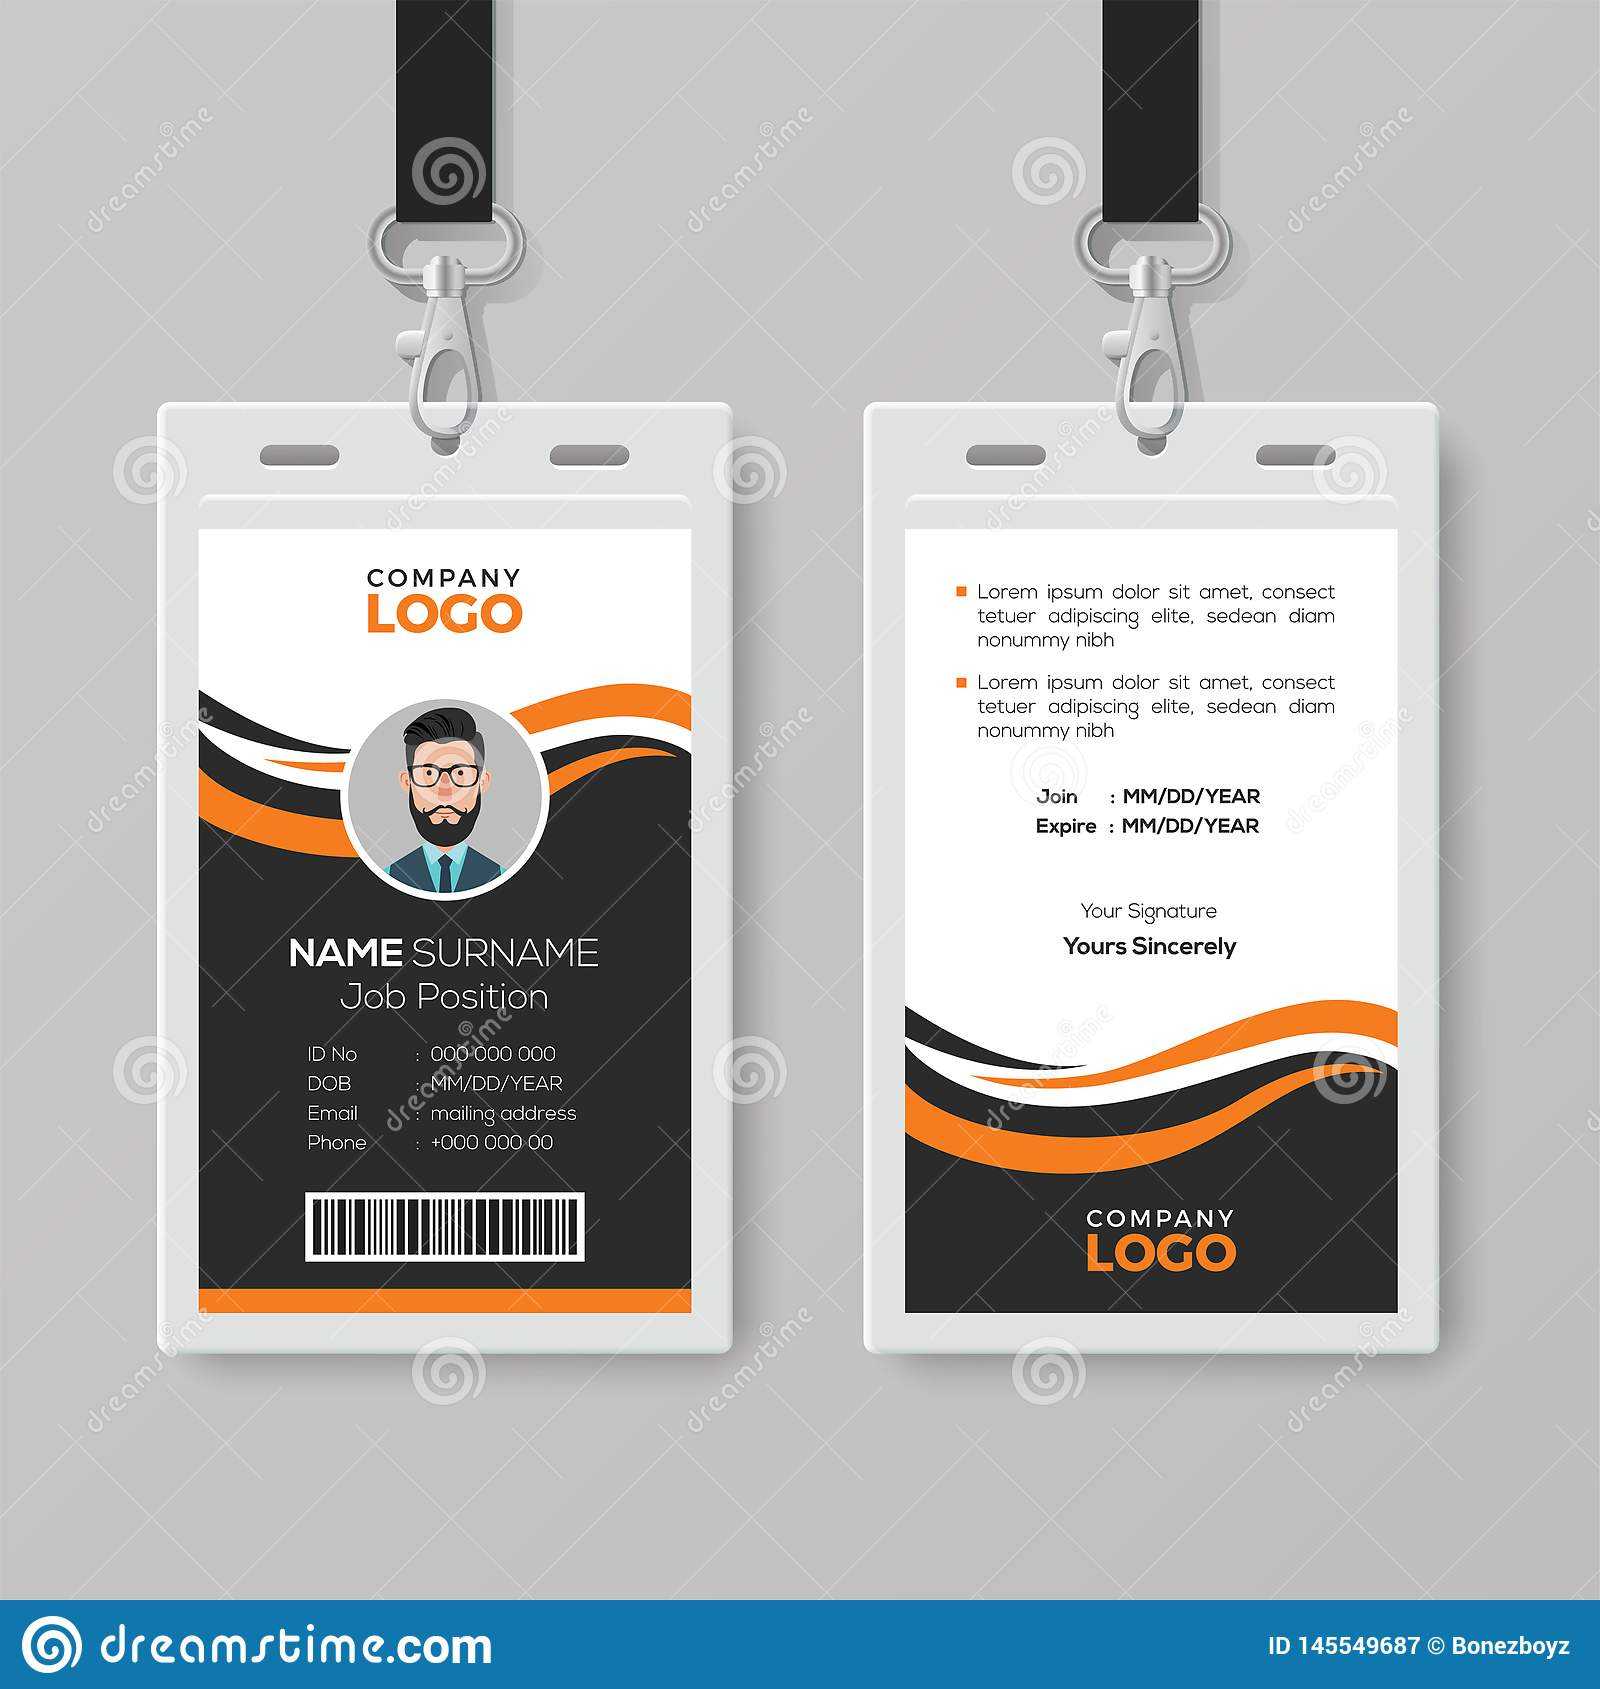 Creative Modern Id Card Template With Orange Details Stock Within Work Id Card Template